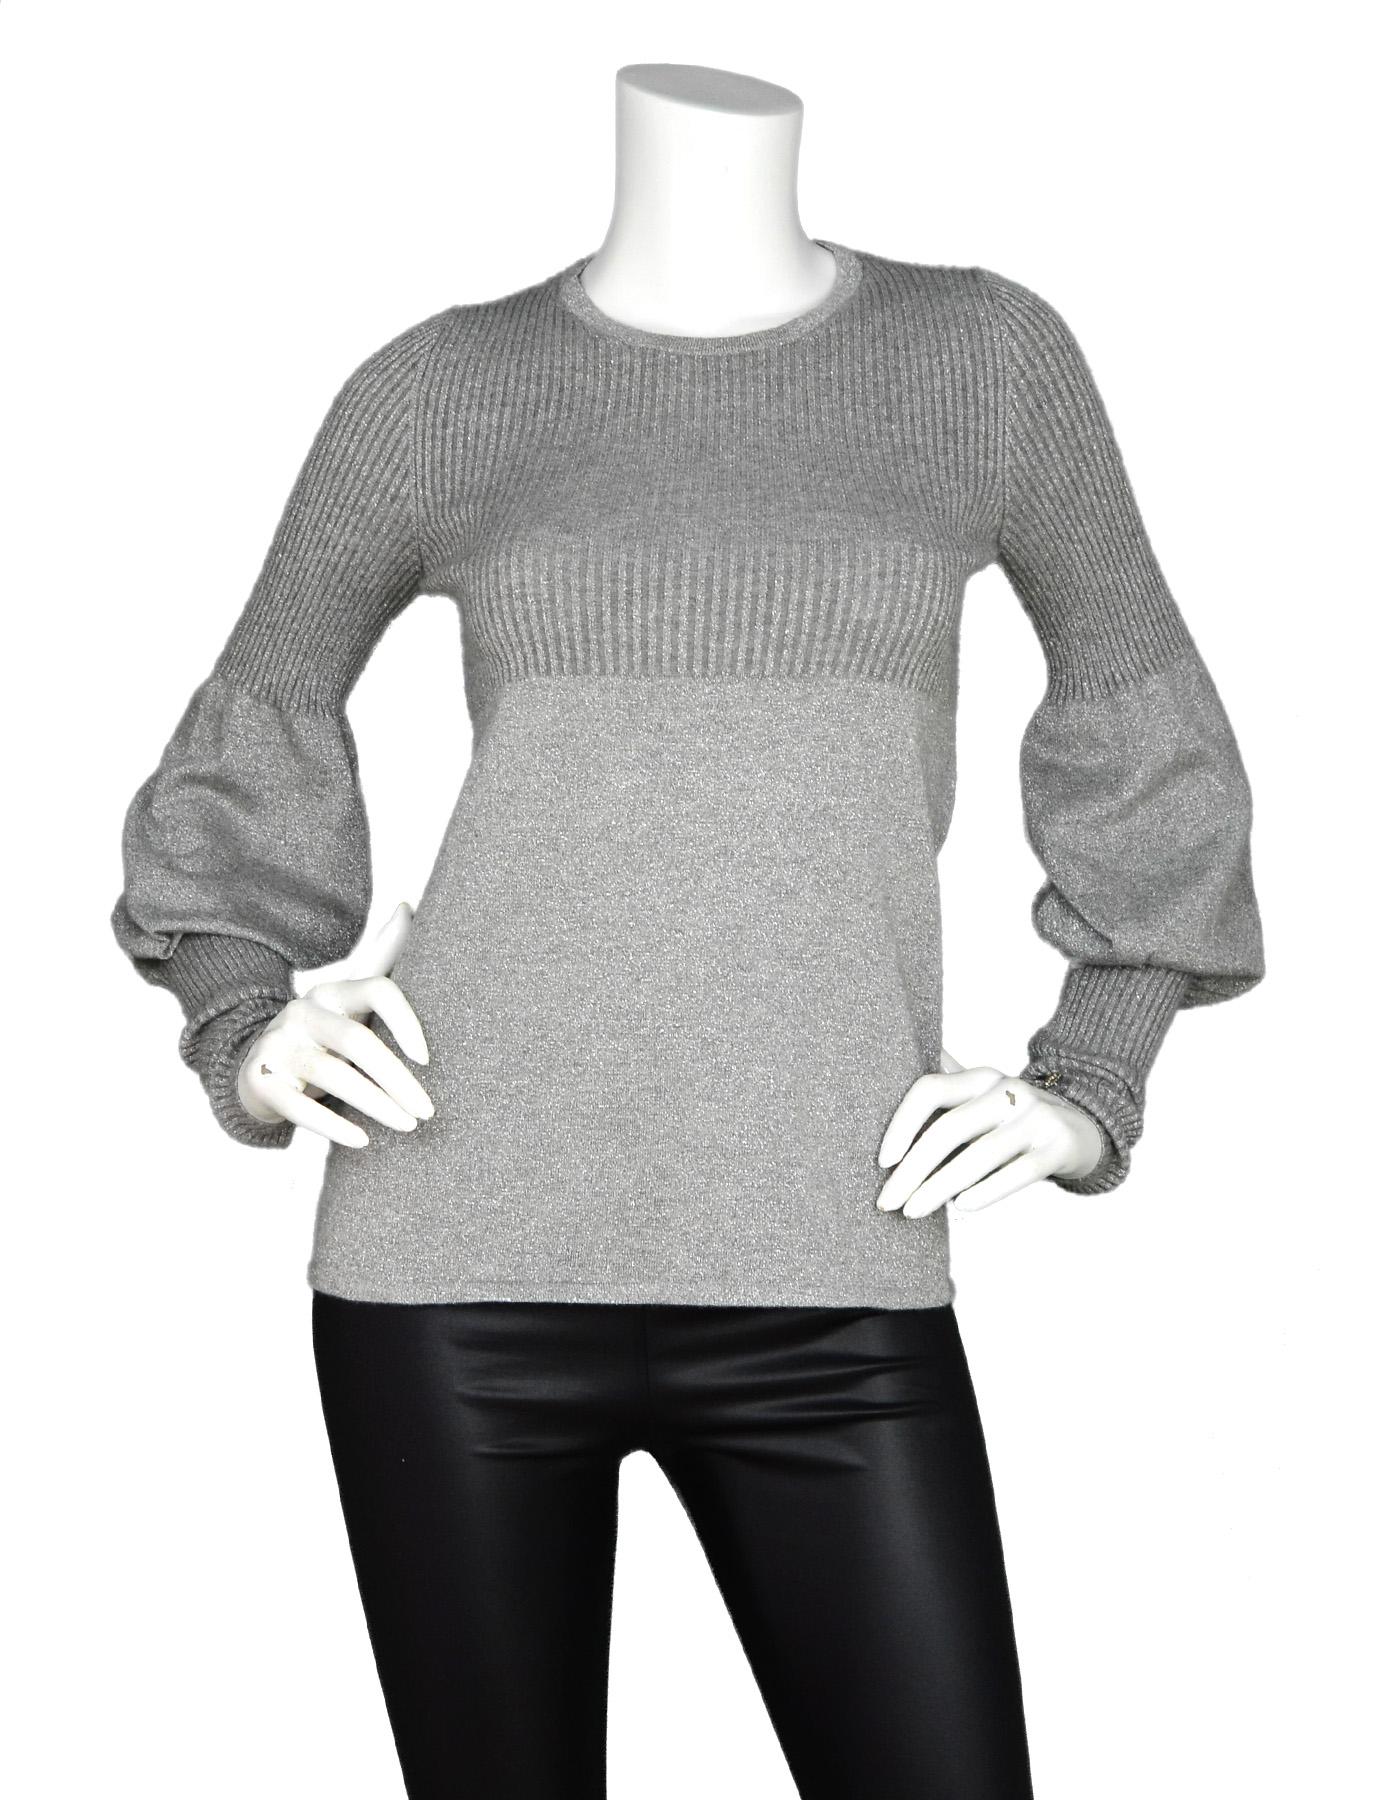 Chanel Grey Cashmere/Cotton Glitter Long Balloon Sleeve Sweater W/ Crystal CC Buttons On Sleeves Sz 36

Made In: Italy
Year Of Production: 2005
Color: Grey
Materials: 60% cashmere, 13% cotton, 7% metalized polyester 
Opening/Closure: Pull